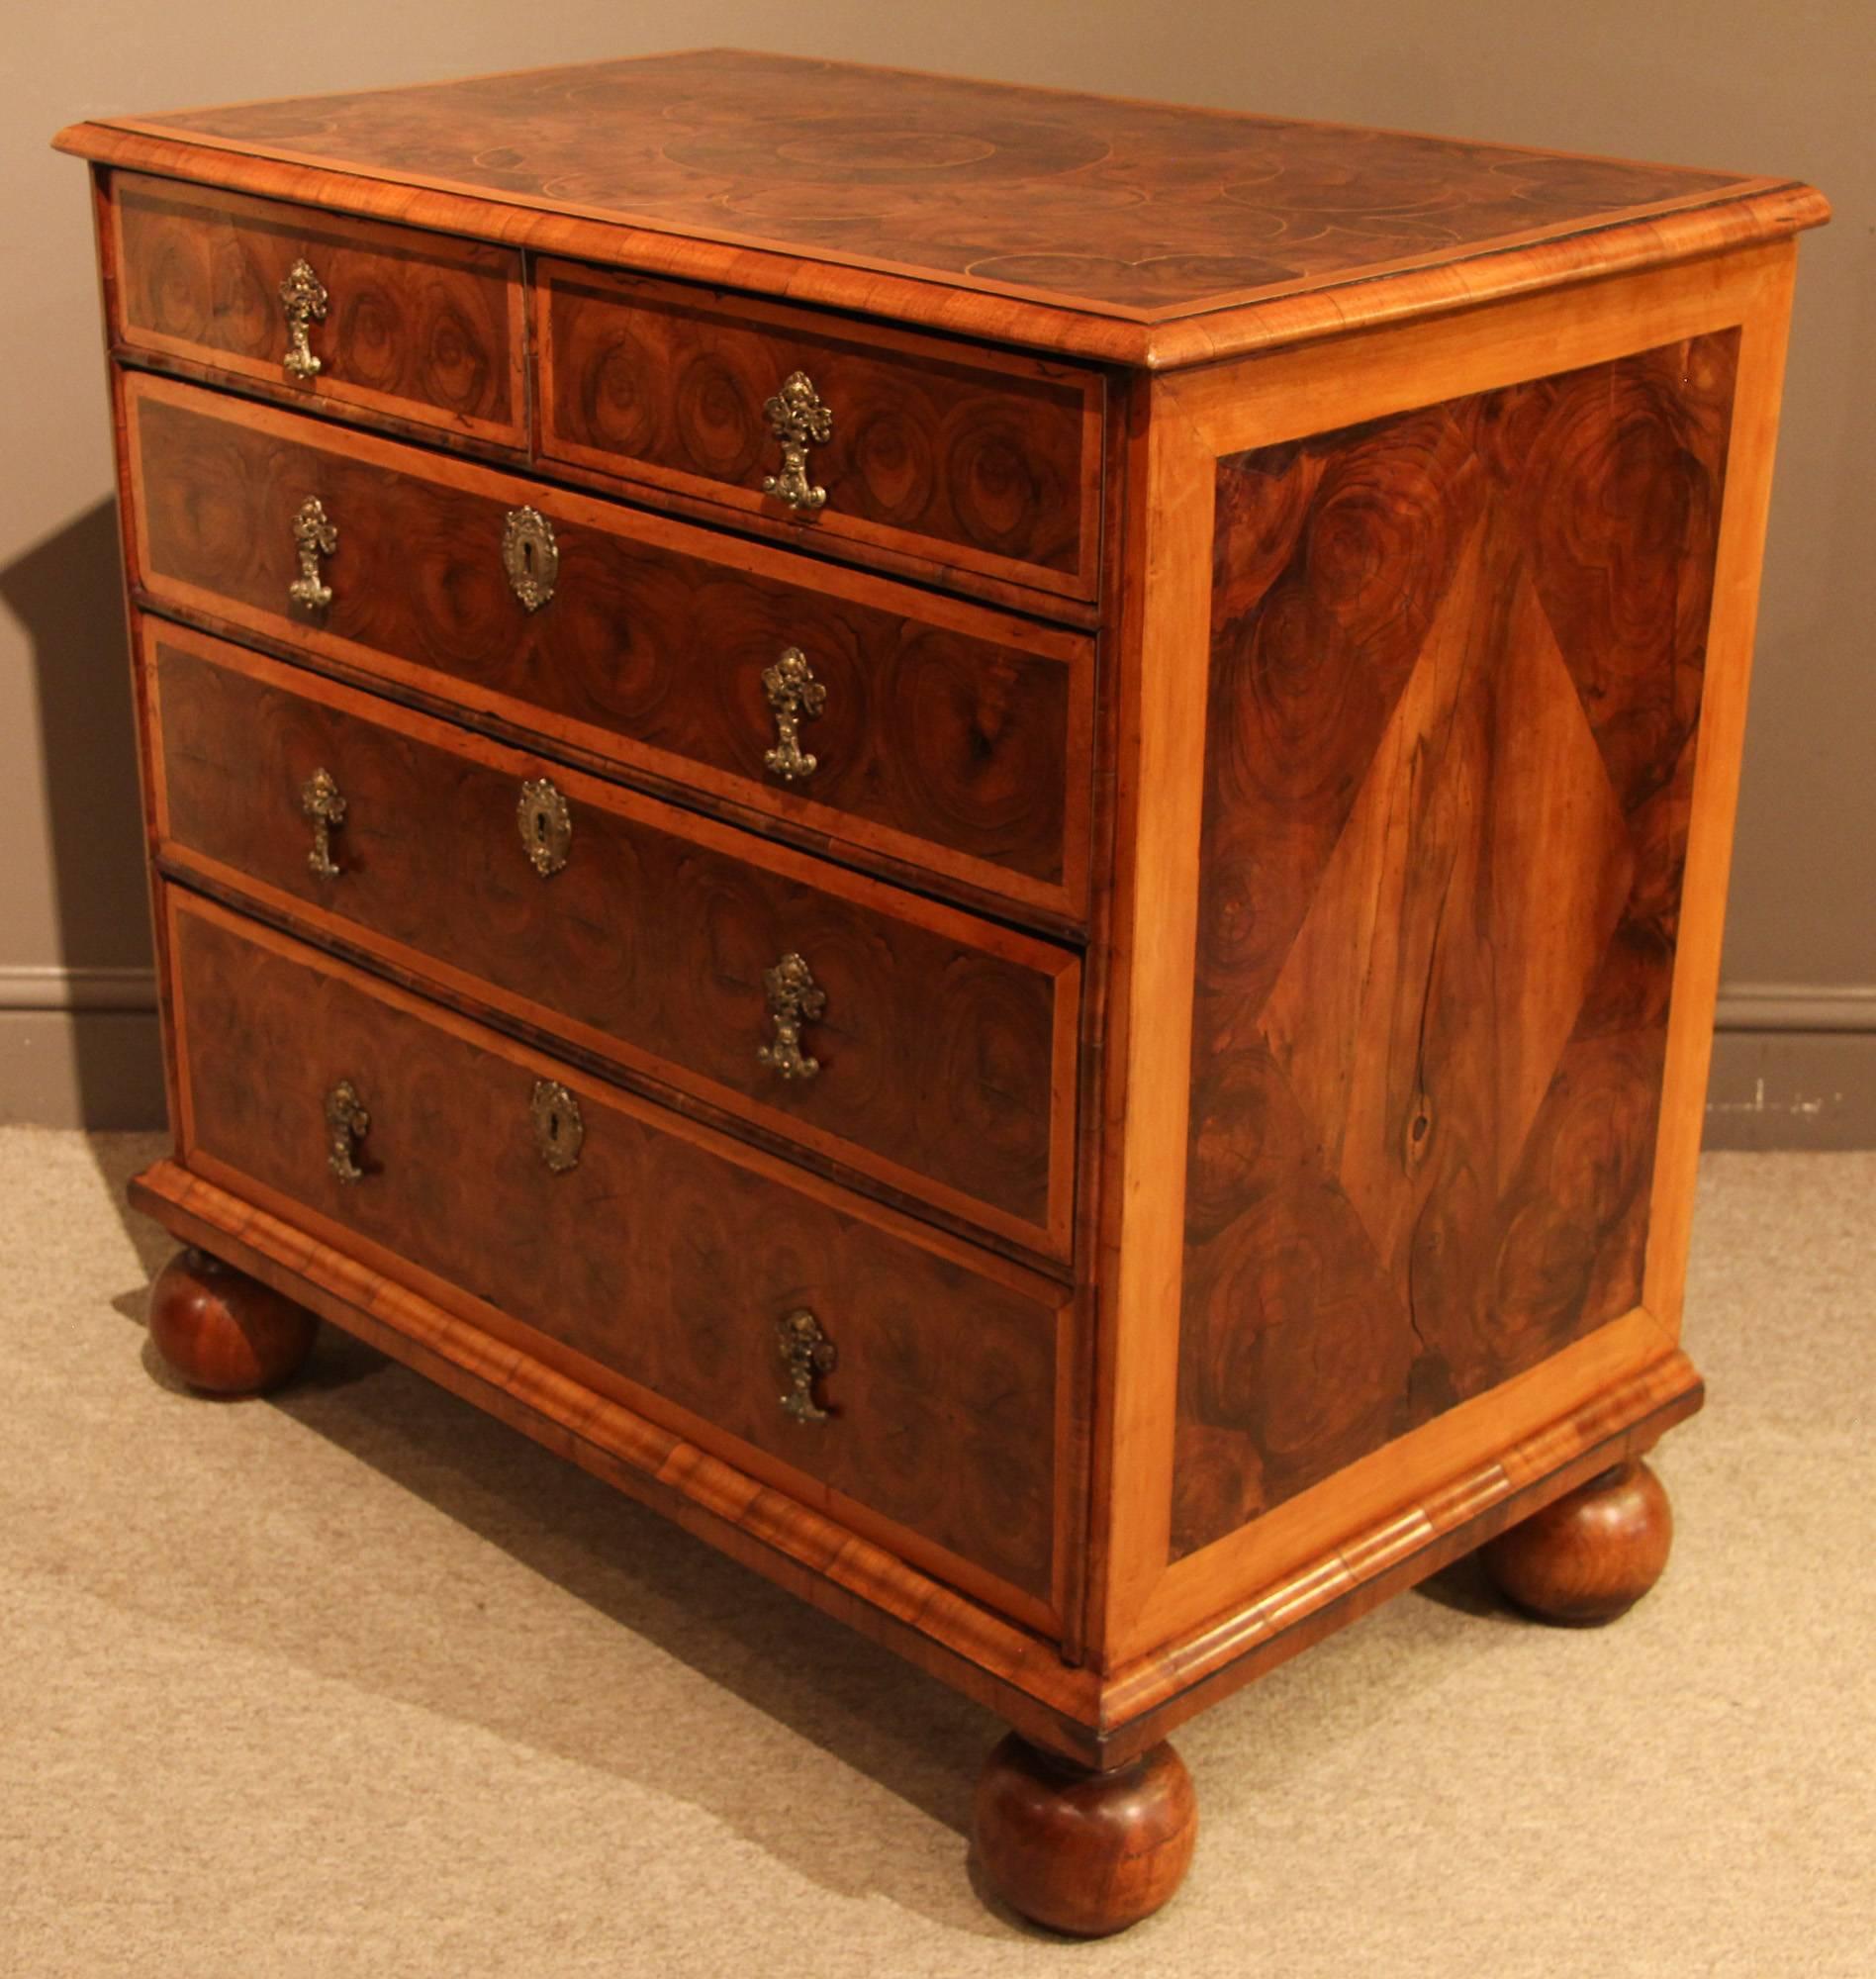 A small William & Mary chest of drawers with olivewood oyster and holly banding with new feet, circa 1690.

All of the items that we advertise for sale have been as accurately described as possible and are in excellent condition, unless